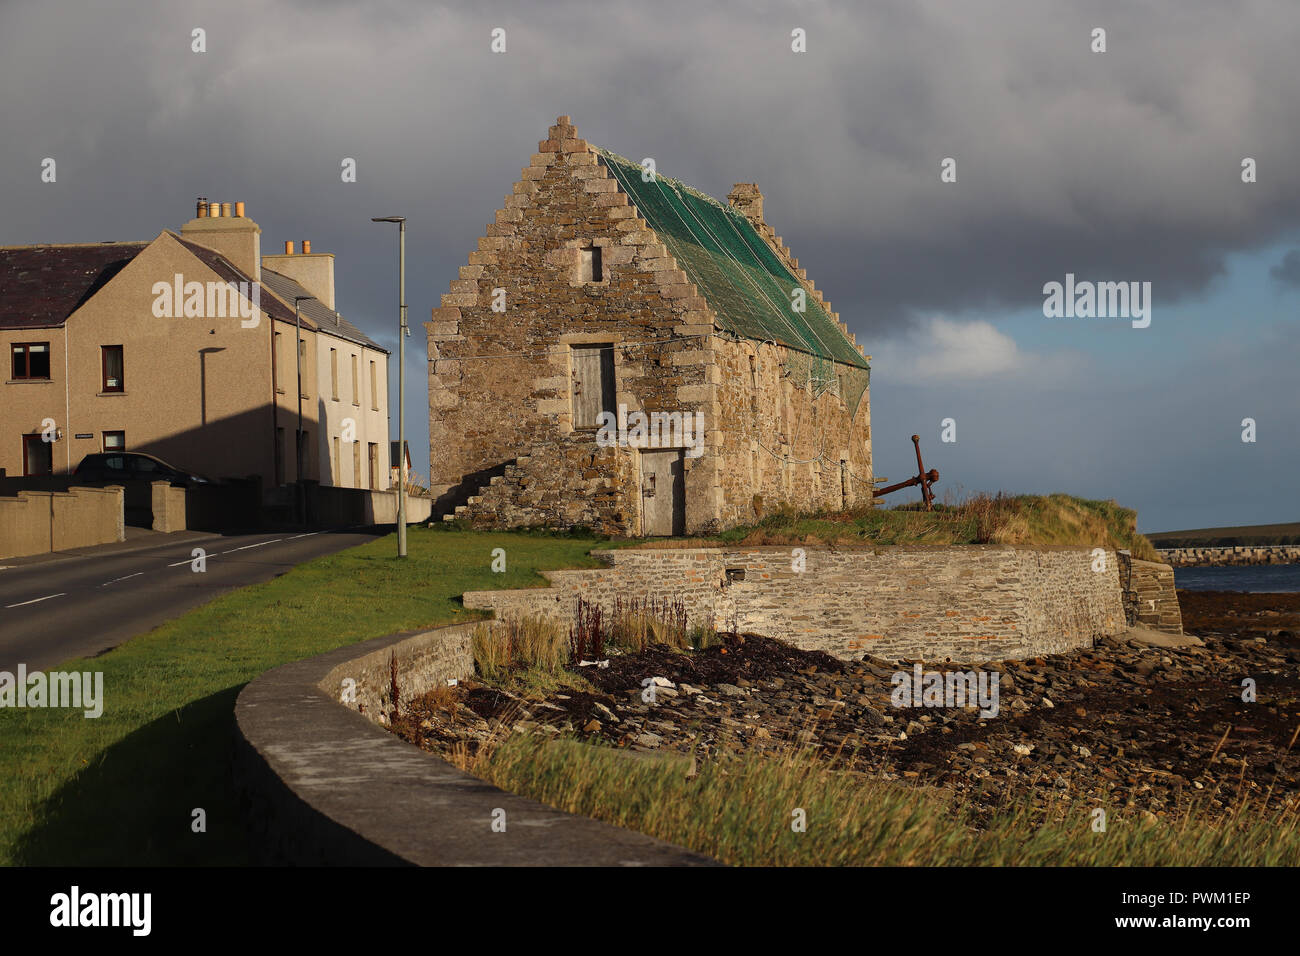 The old storehouse in St. Mary's, Orkney, Uk, was built in 1649 for the village. It has crow-stepped gables, also called corbie step in Scotland. Stock Photo